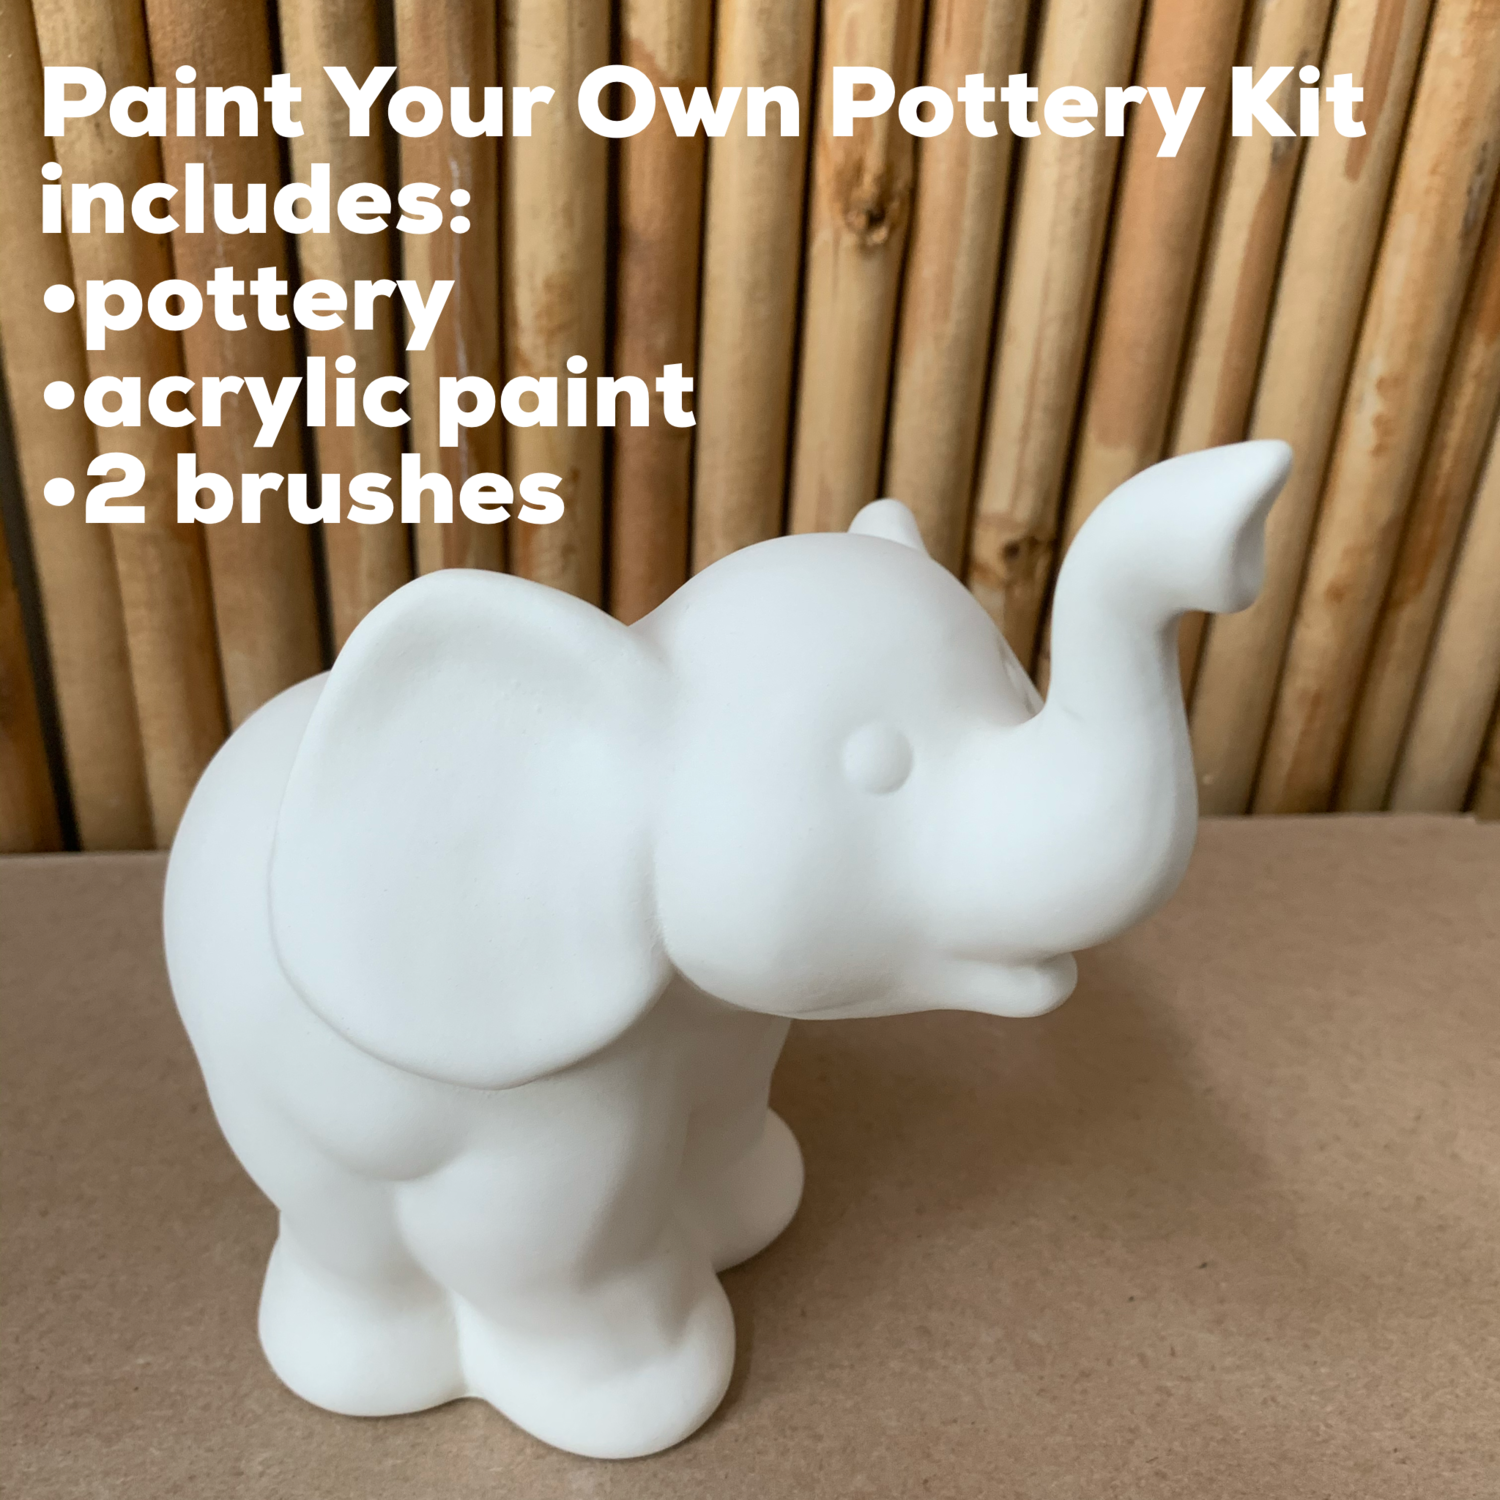 NO FIRE Paint Your Own Pottery Kit - 
Ceramic Elephant Figurine Acrylic Painting Kit